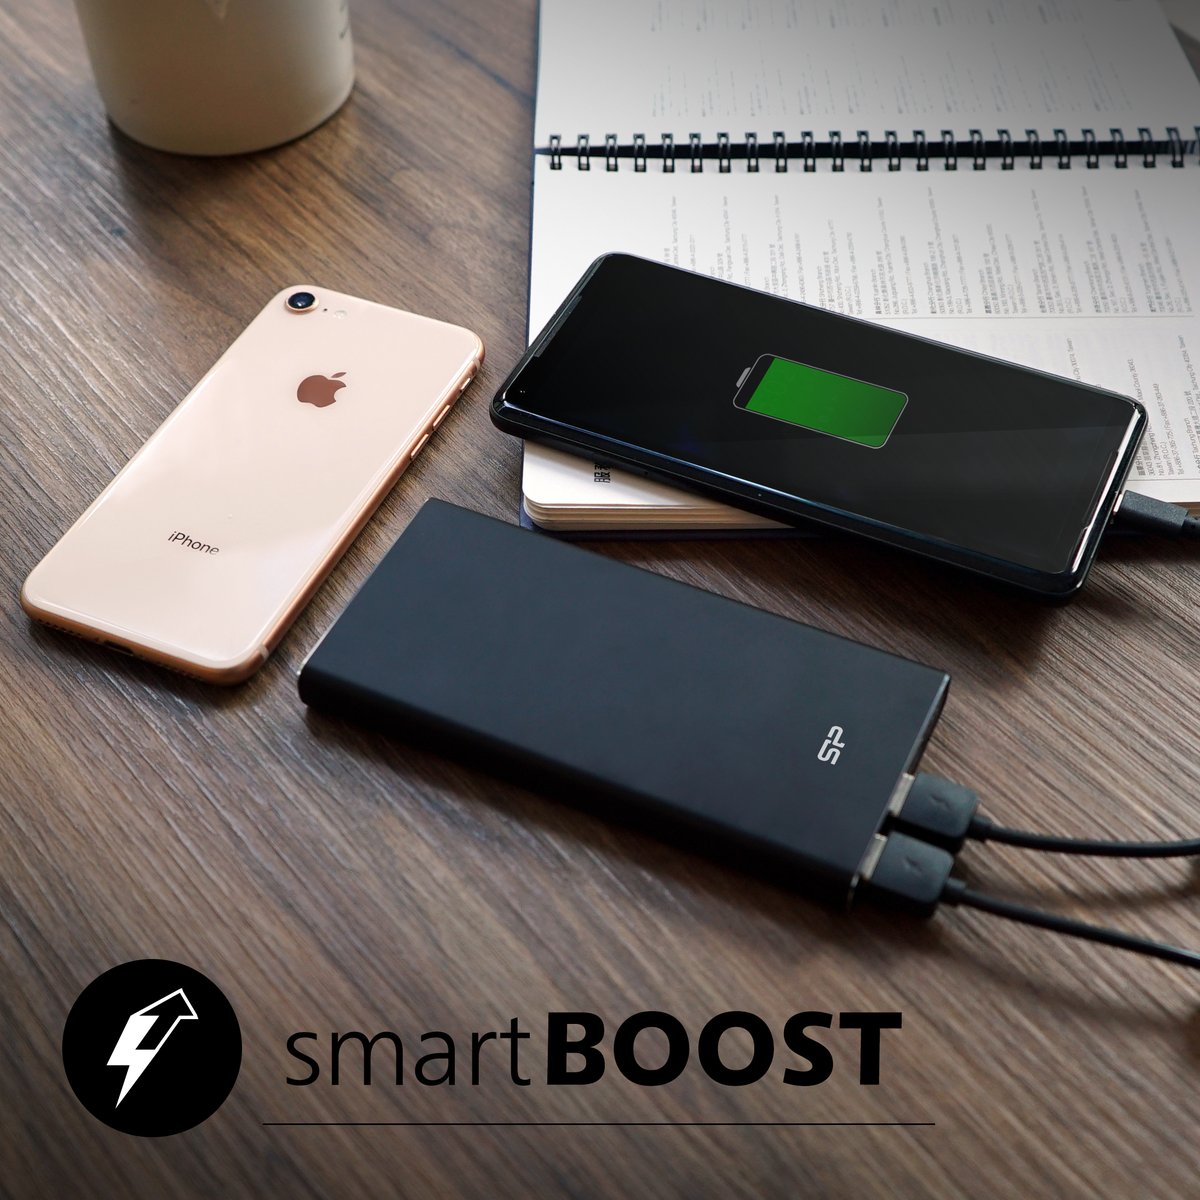 All of our new PD/QC3.0 power banks are equipped with our smartBOOST technology ⚙️, a dual-engine speed-enhancing technology that utilizes advanced high-speed ⚡ charging rates via Quick Charge (QC3.0) or Power Delivery (PD).